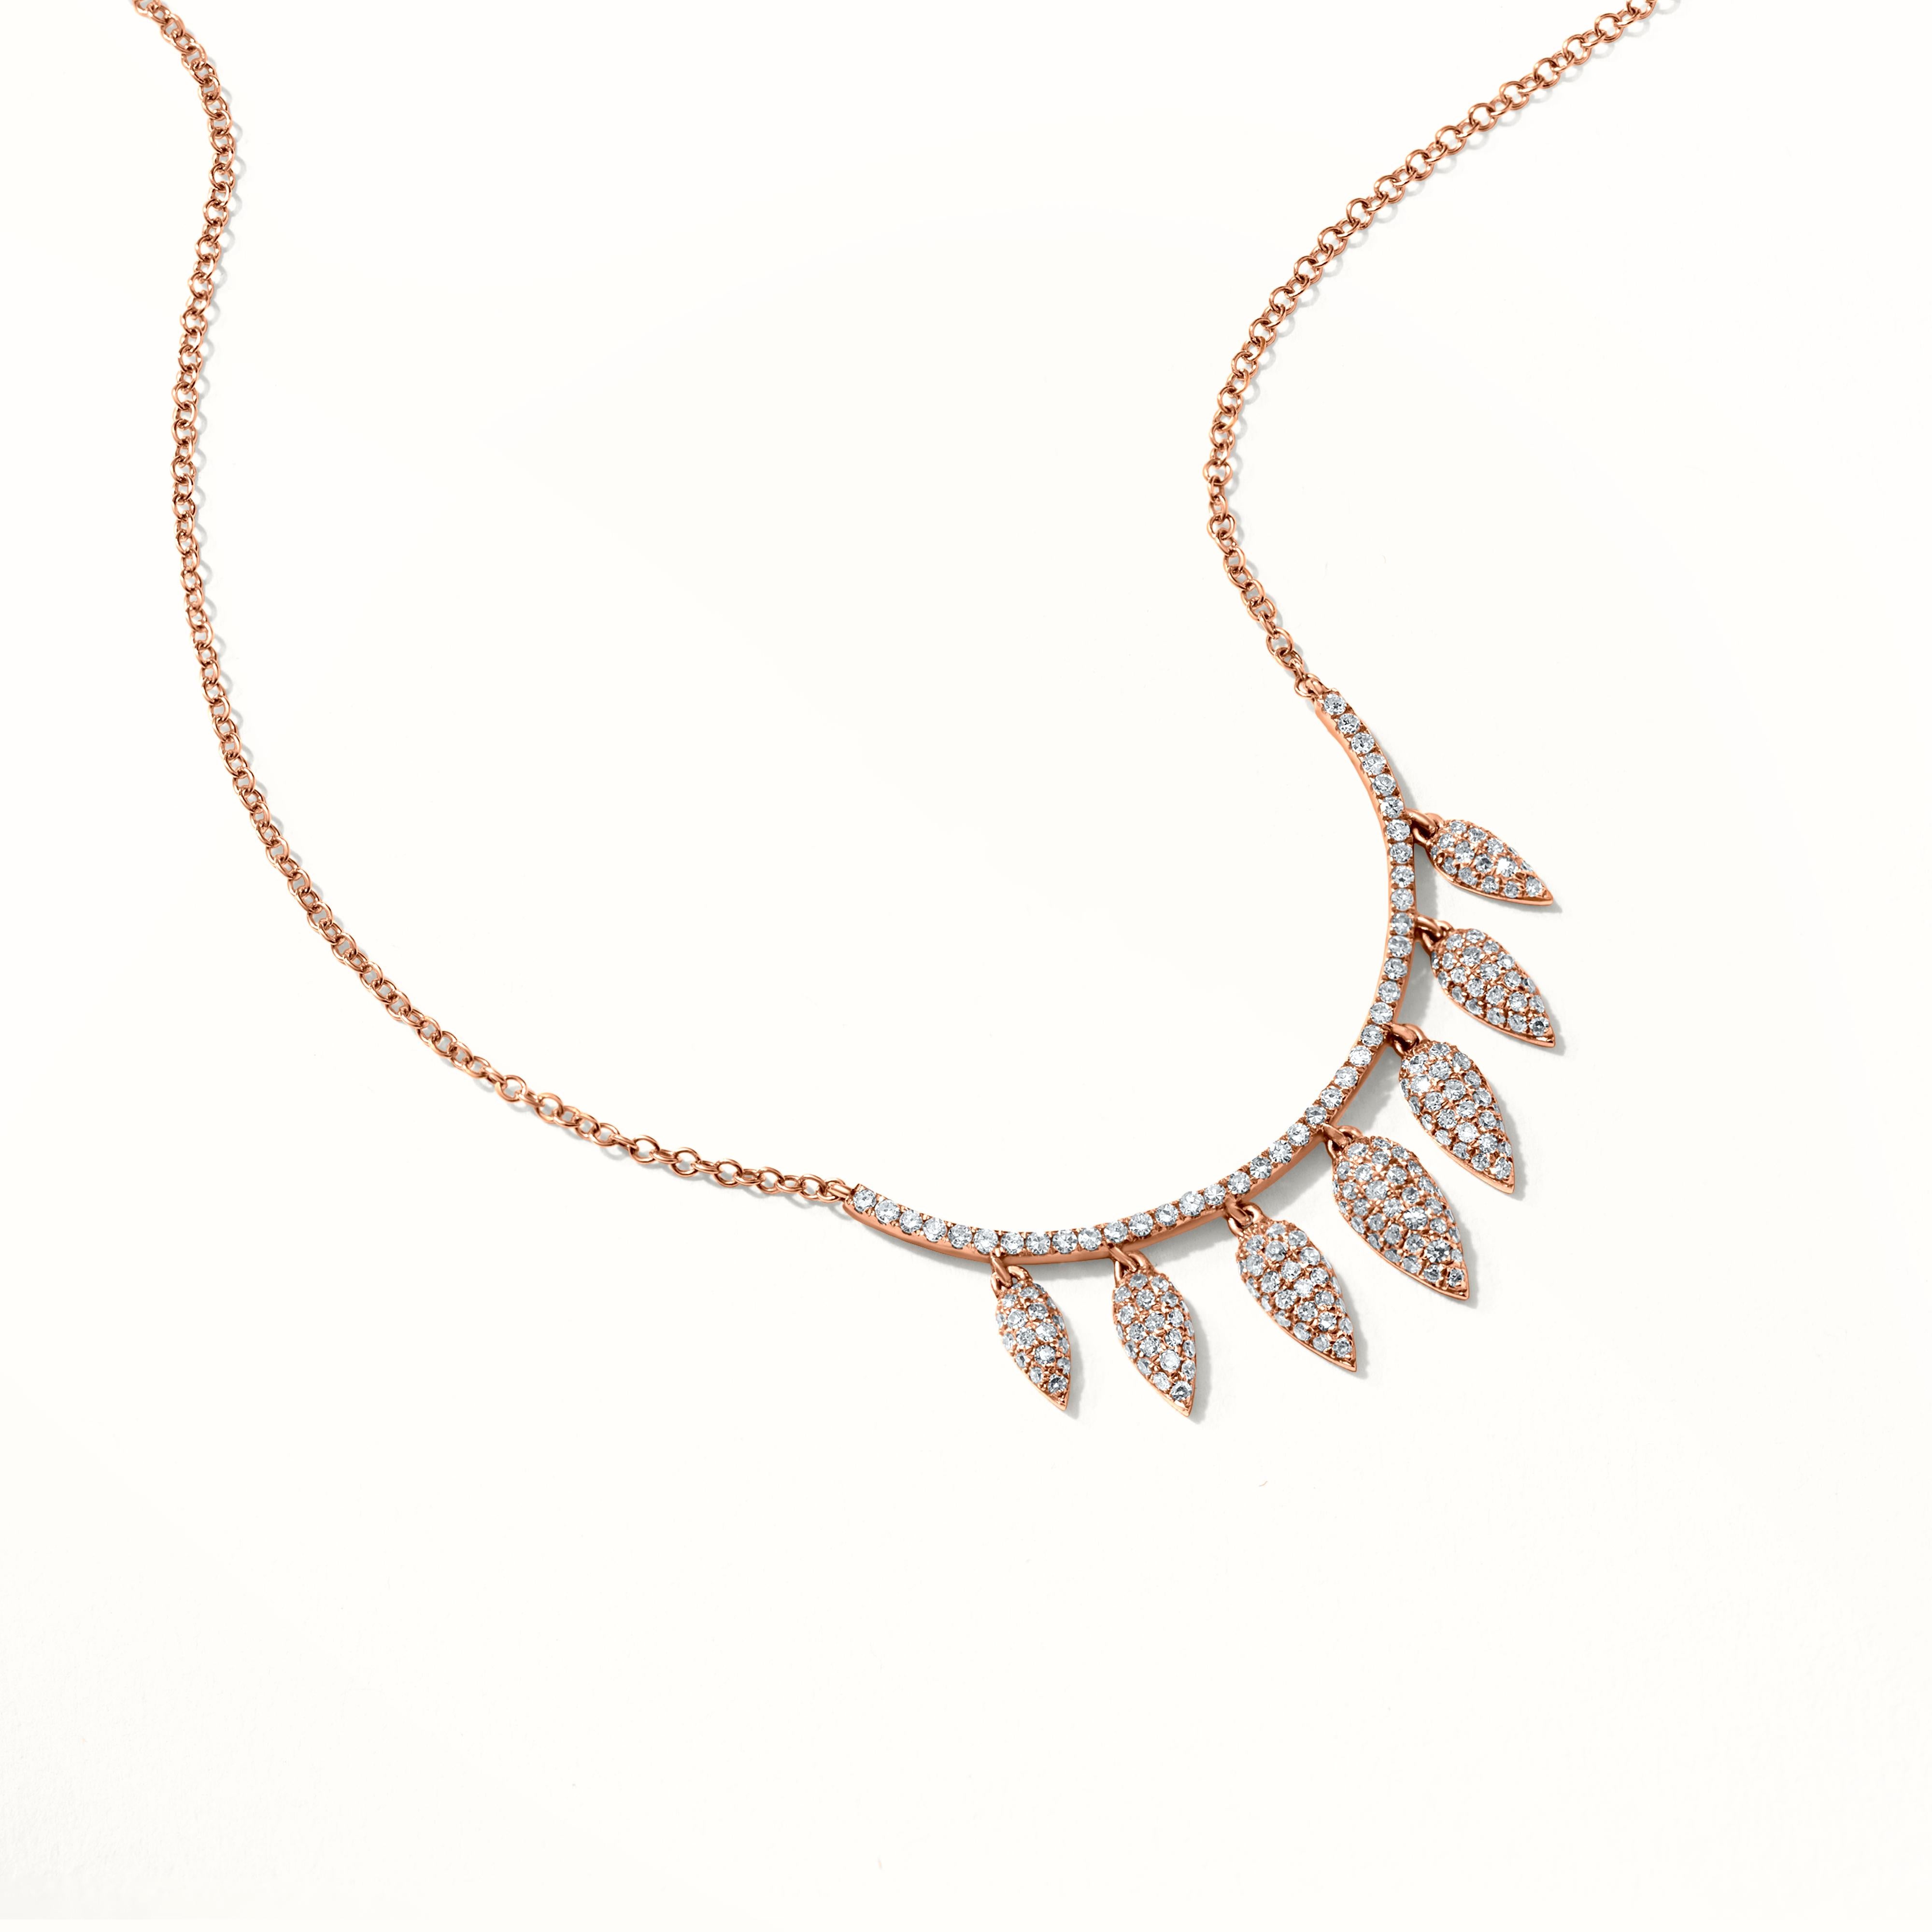 This magnificent Luxle leaf pendant necklace is made in 14K Rose Gold and sways with grace. The leaf patterns are encrusted with 0.56 carats of round single-cut diamonds that flash with brilliance. This pendant necklace is understated but beautiful,